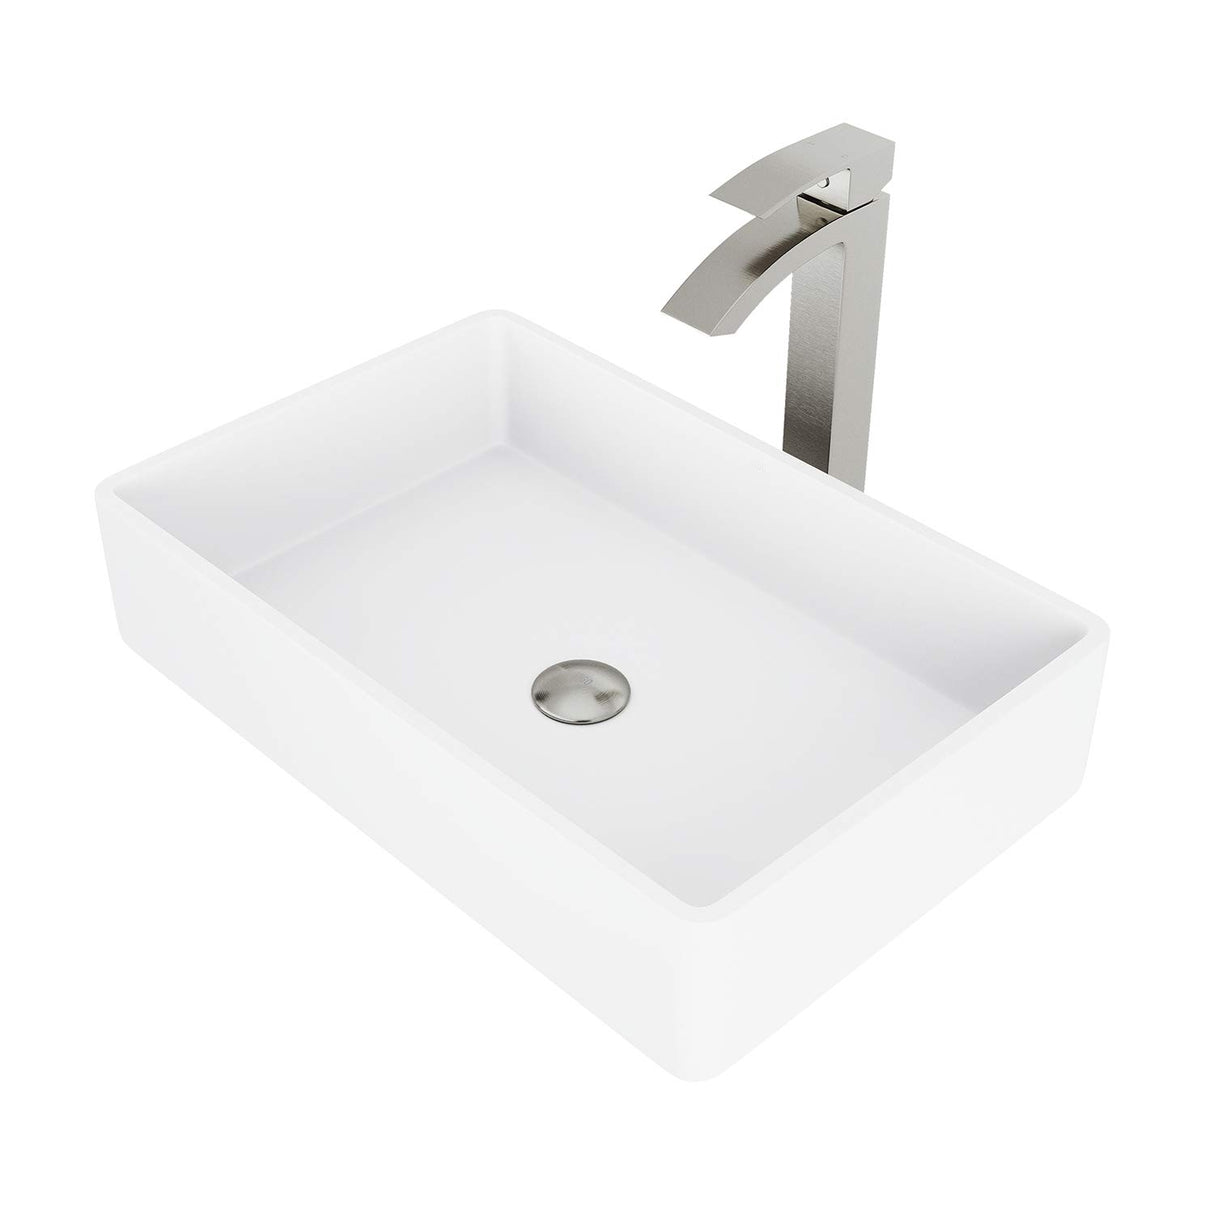 VIGO VGT1230 13.88" L -21.25" W -12.0" H Handmade Countertop White Matte Stone Rectangle Vessel Bathroom Sink Set in Matte White Finish with Brushed Nickel Single-Handle Faucet and Pop Up Drain